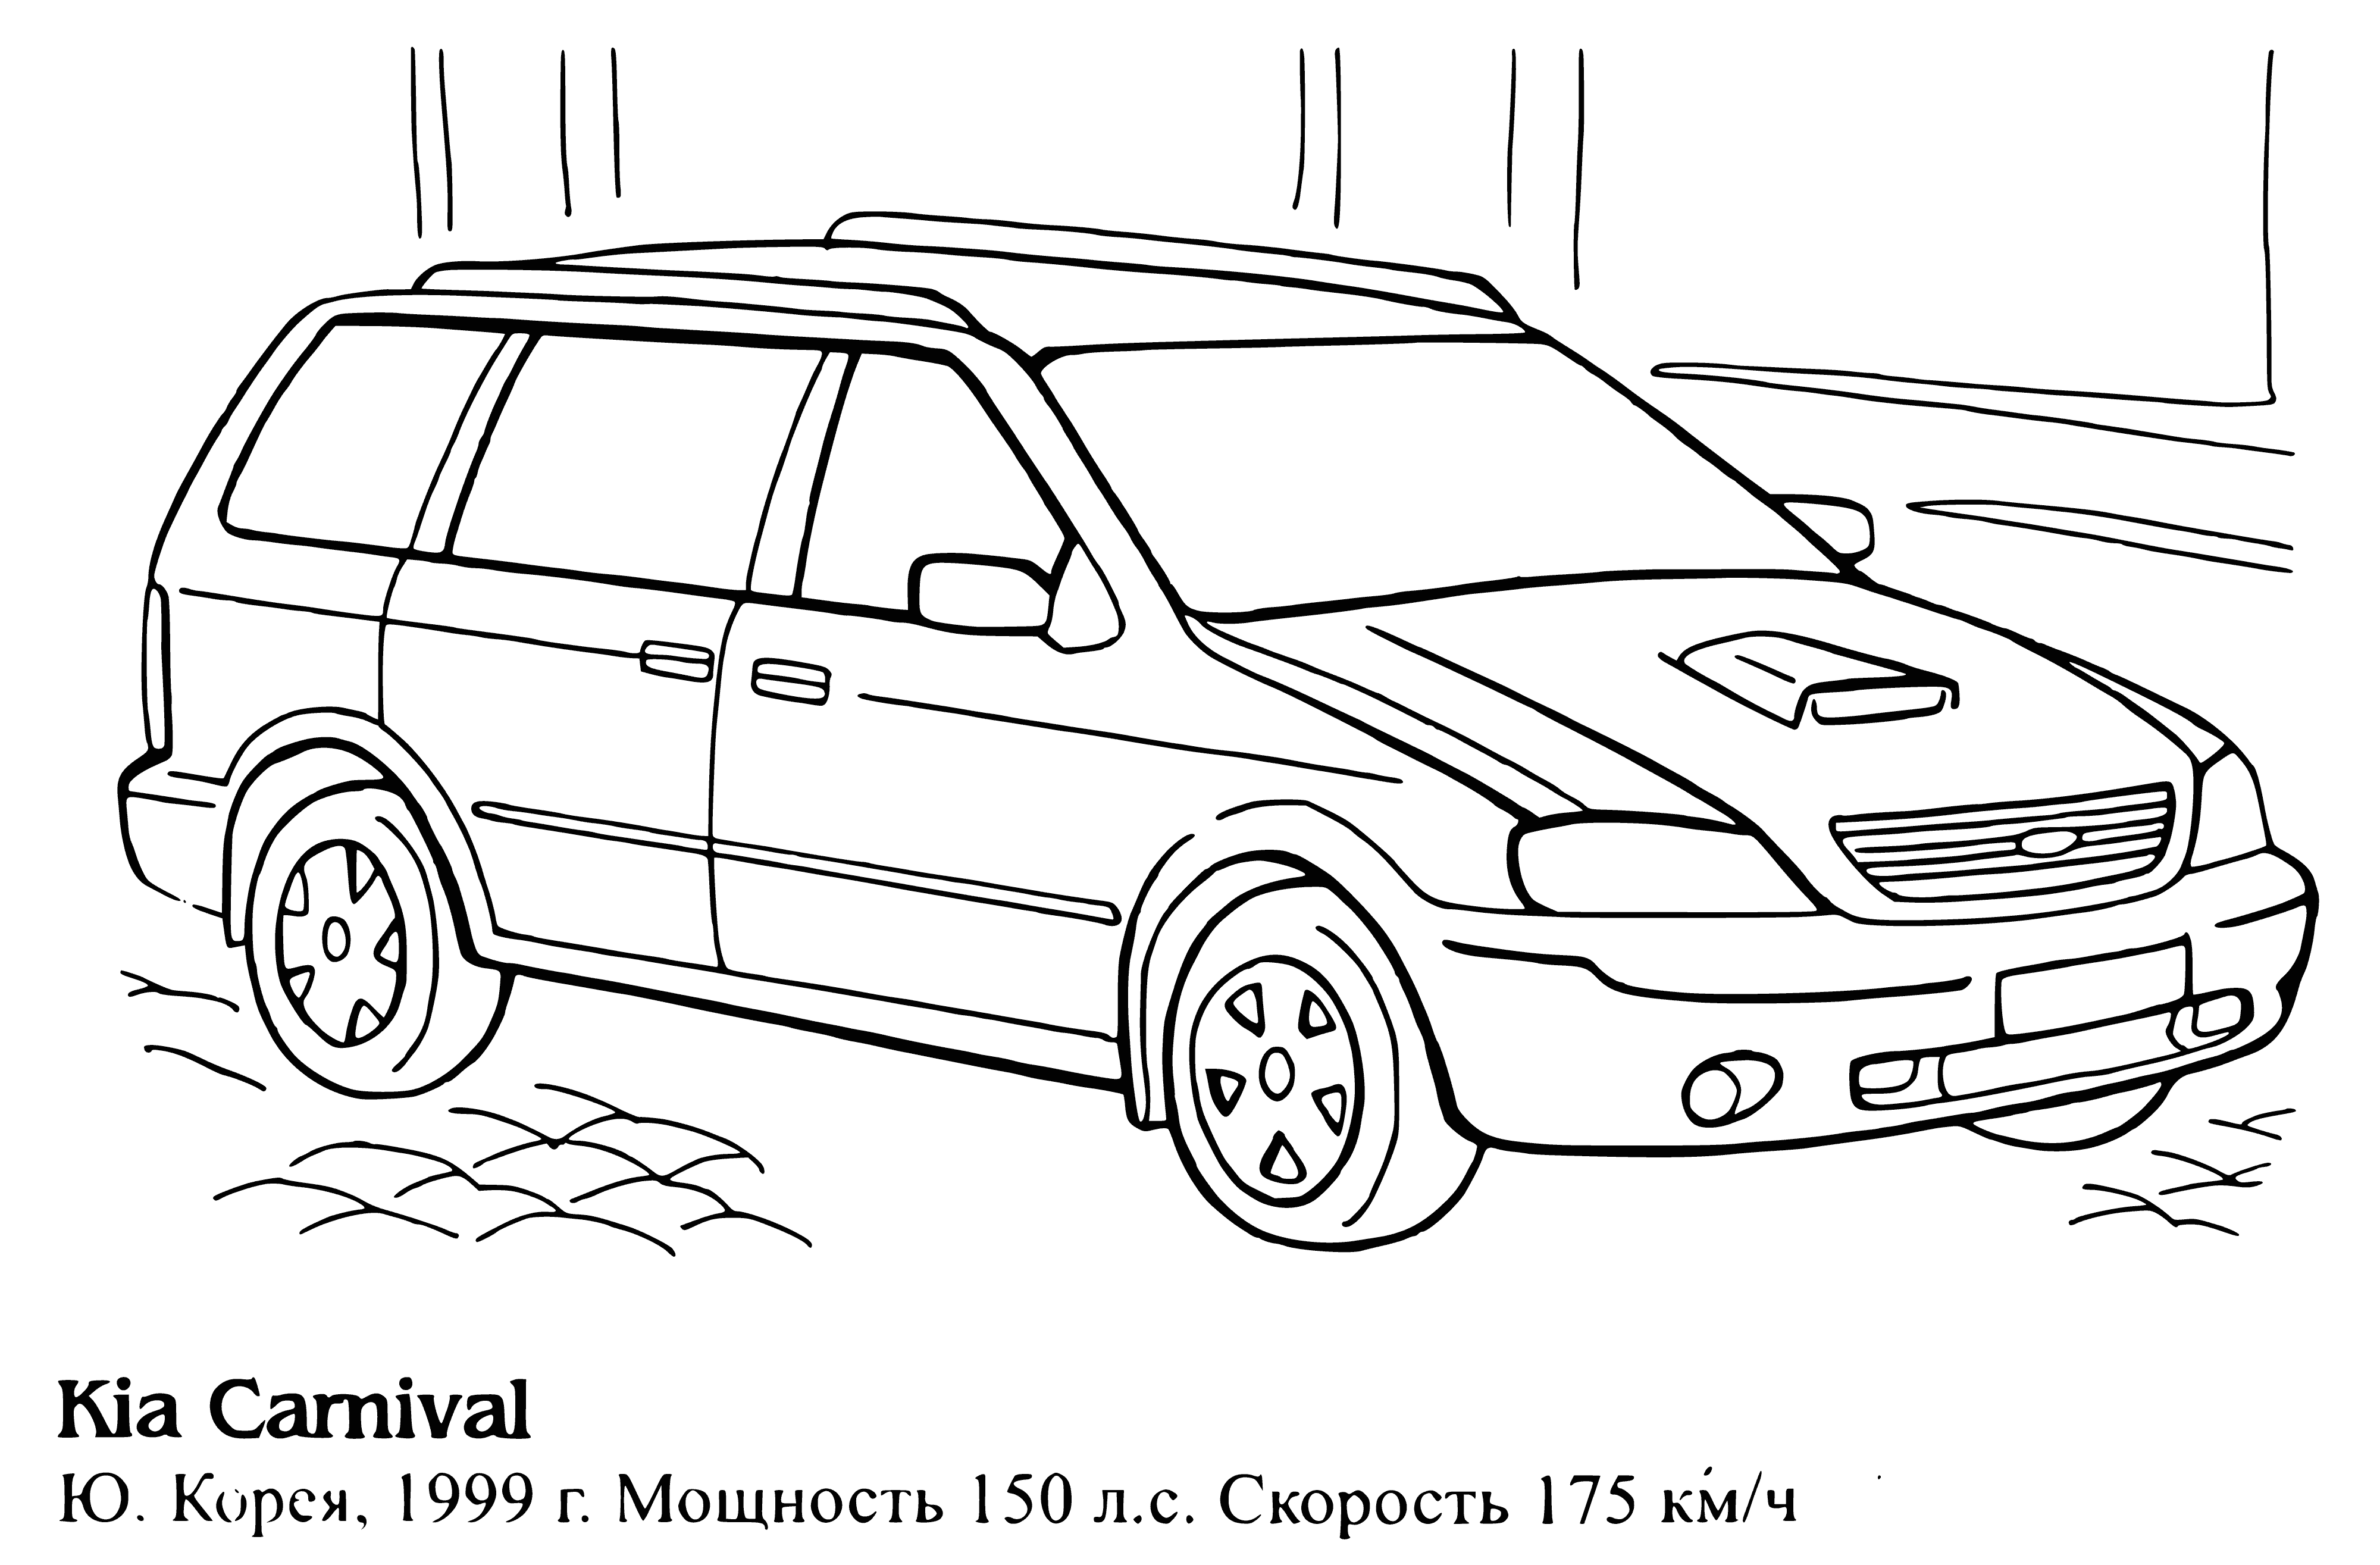 coloring page: Kia Carnival is a 8-seater minivan with sliding door, regulr driver's door, roof rack & silver tinted windows.